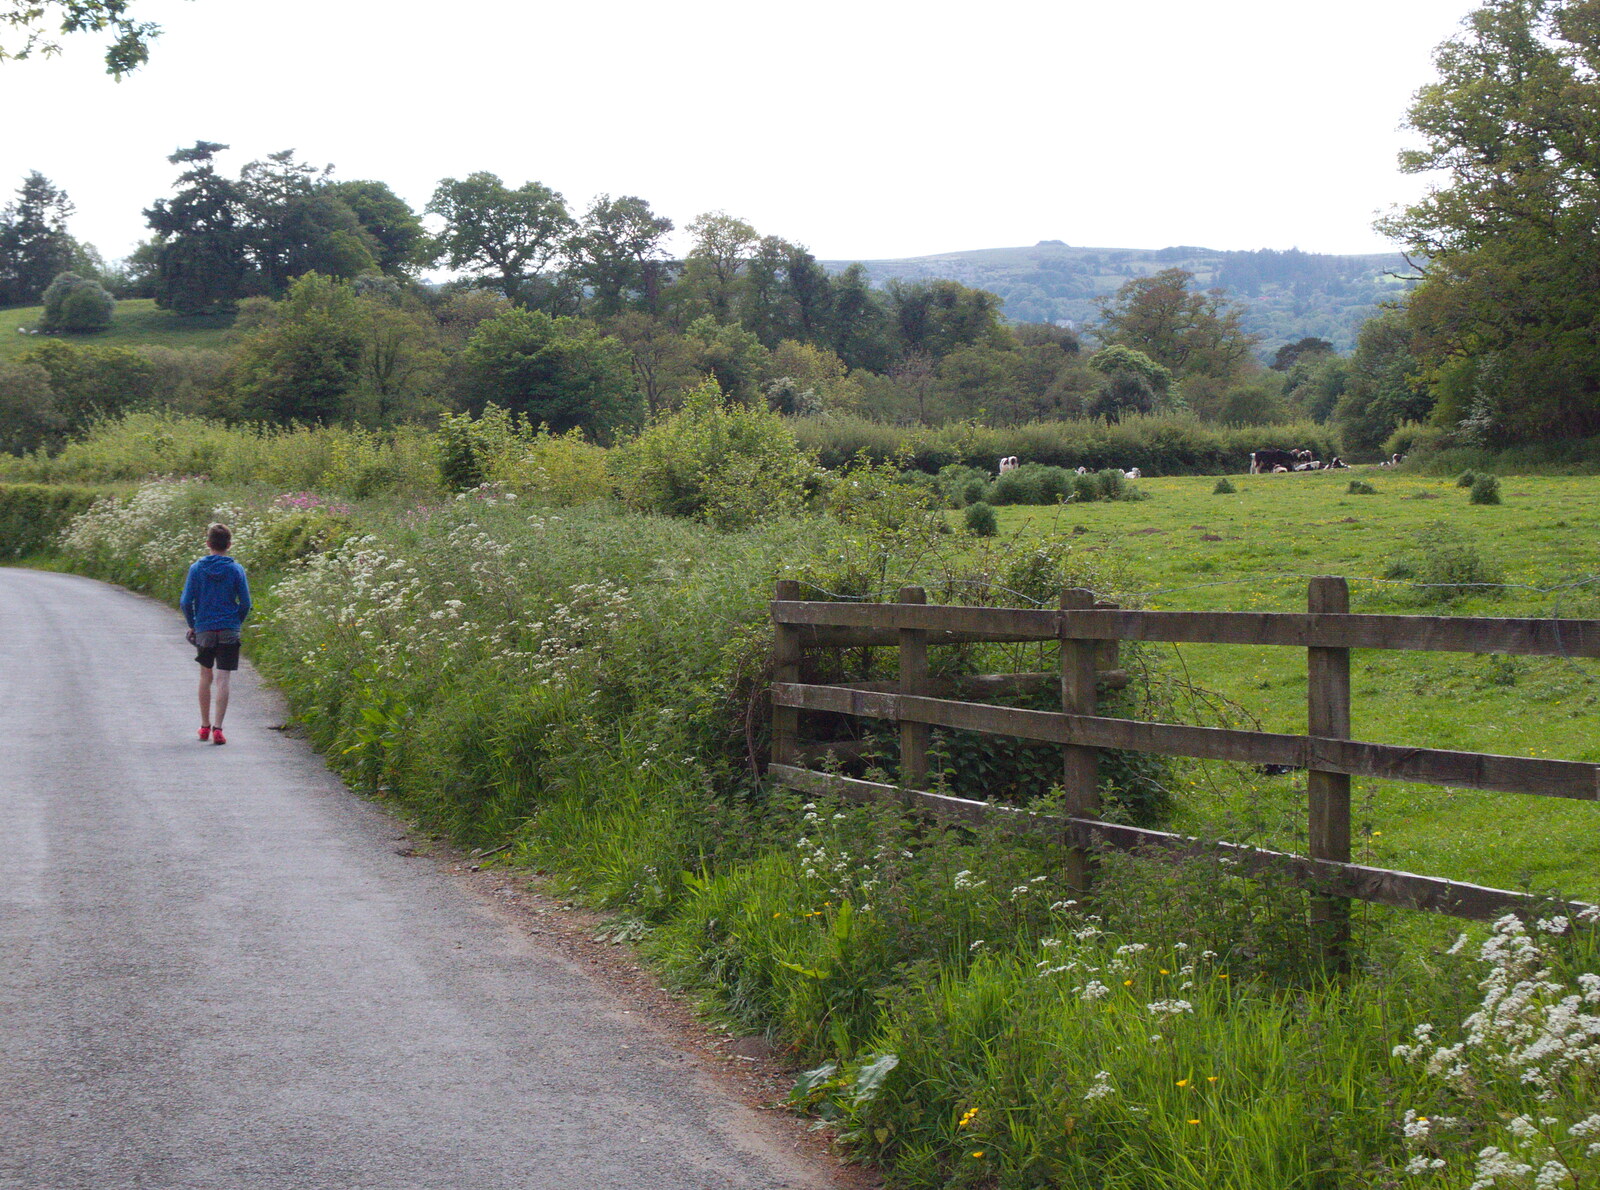 Chagford Lido and a Trip to Parke, Bovey Tracey, Devon - 25th May 2019: Someone's walking to Chagford